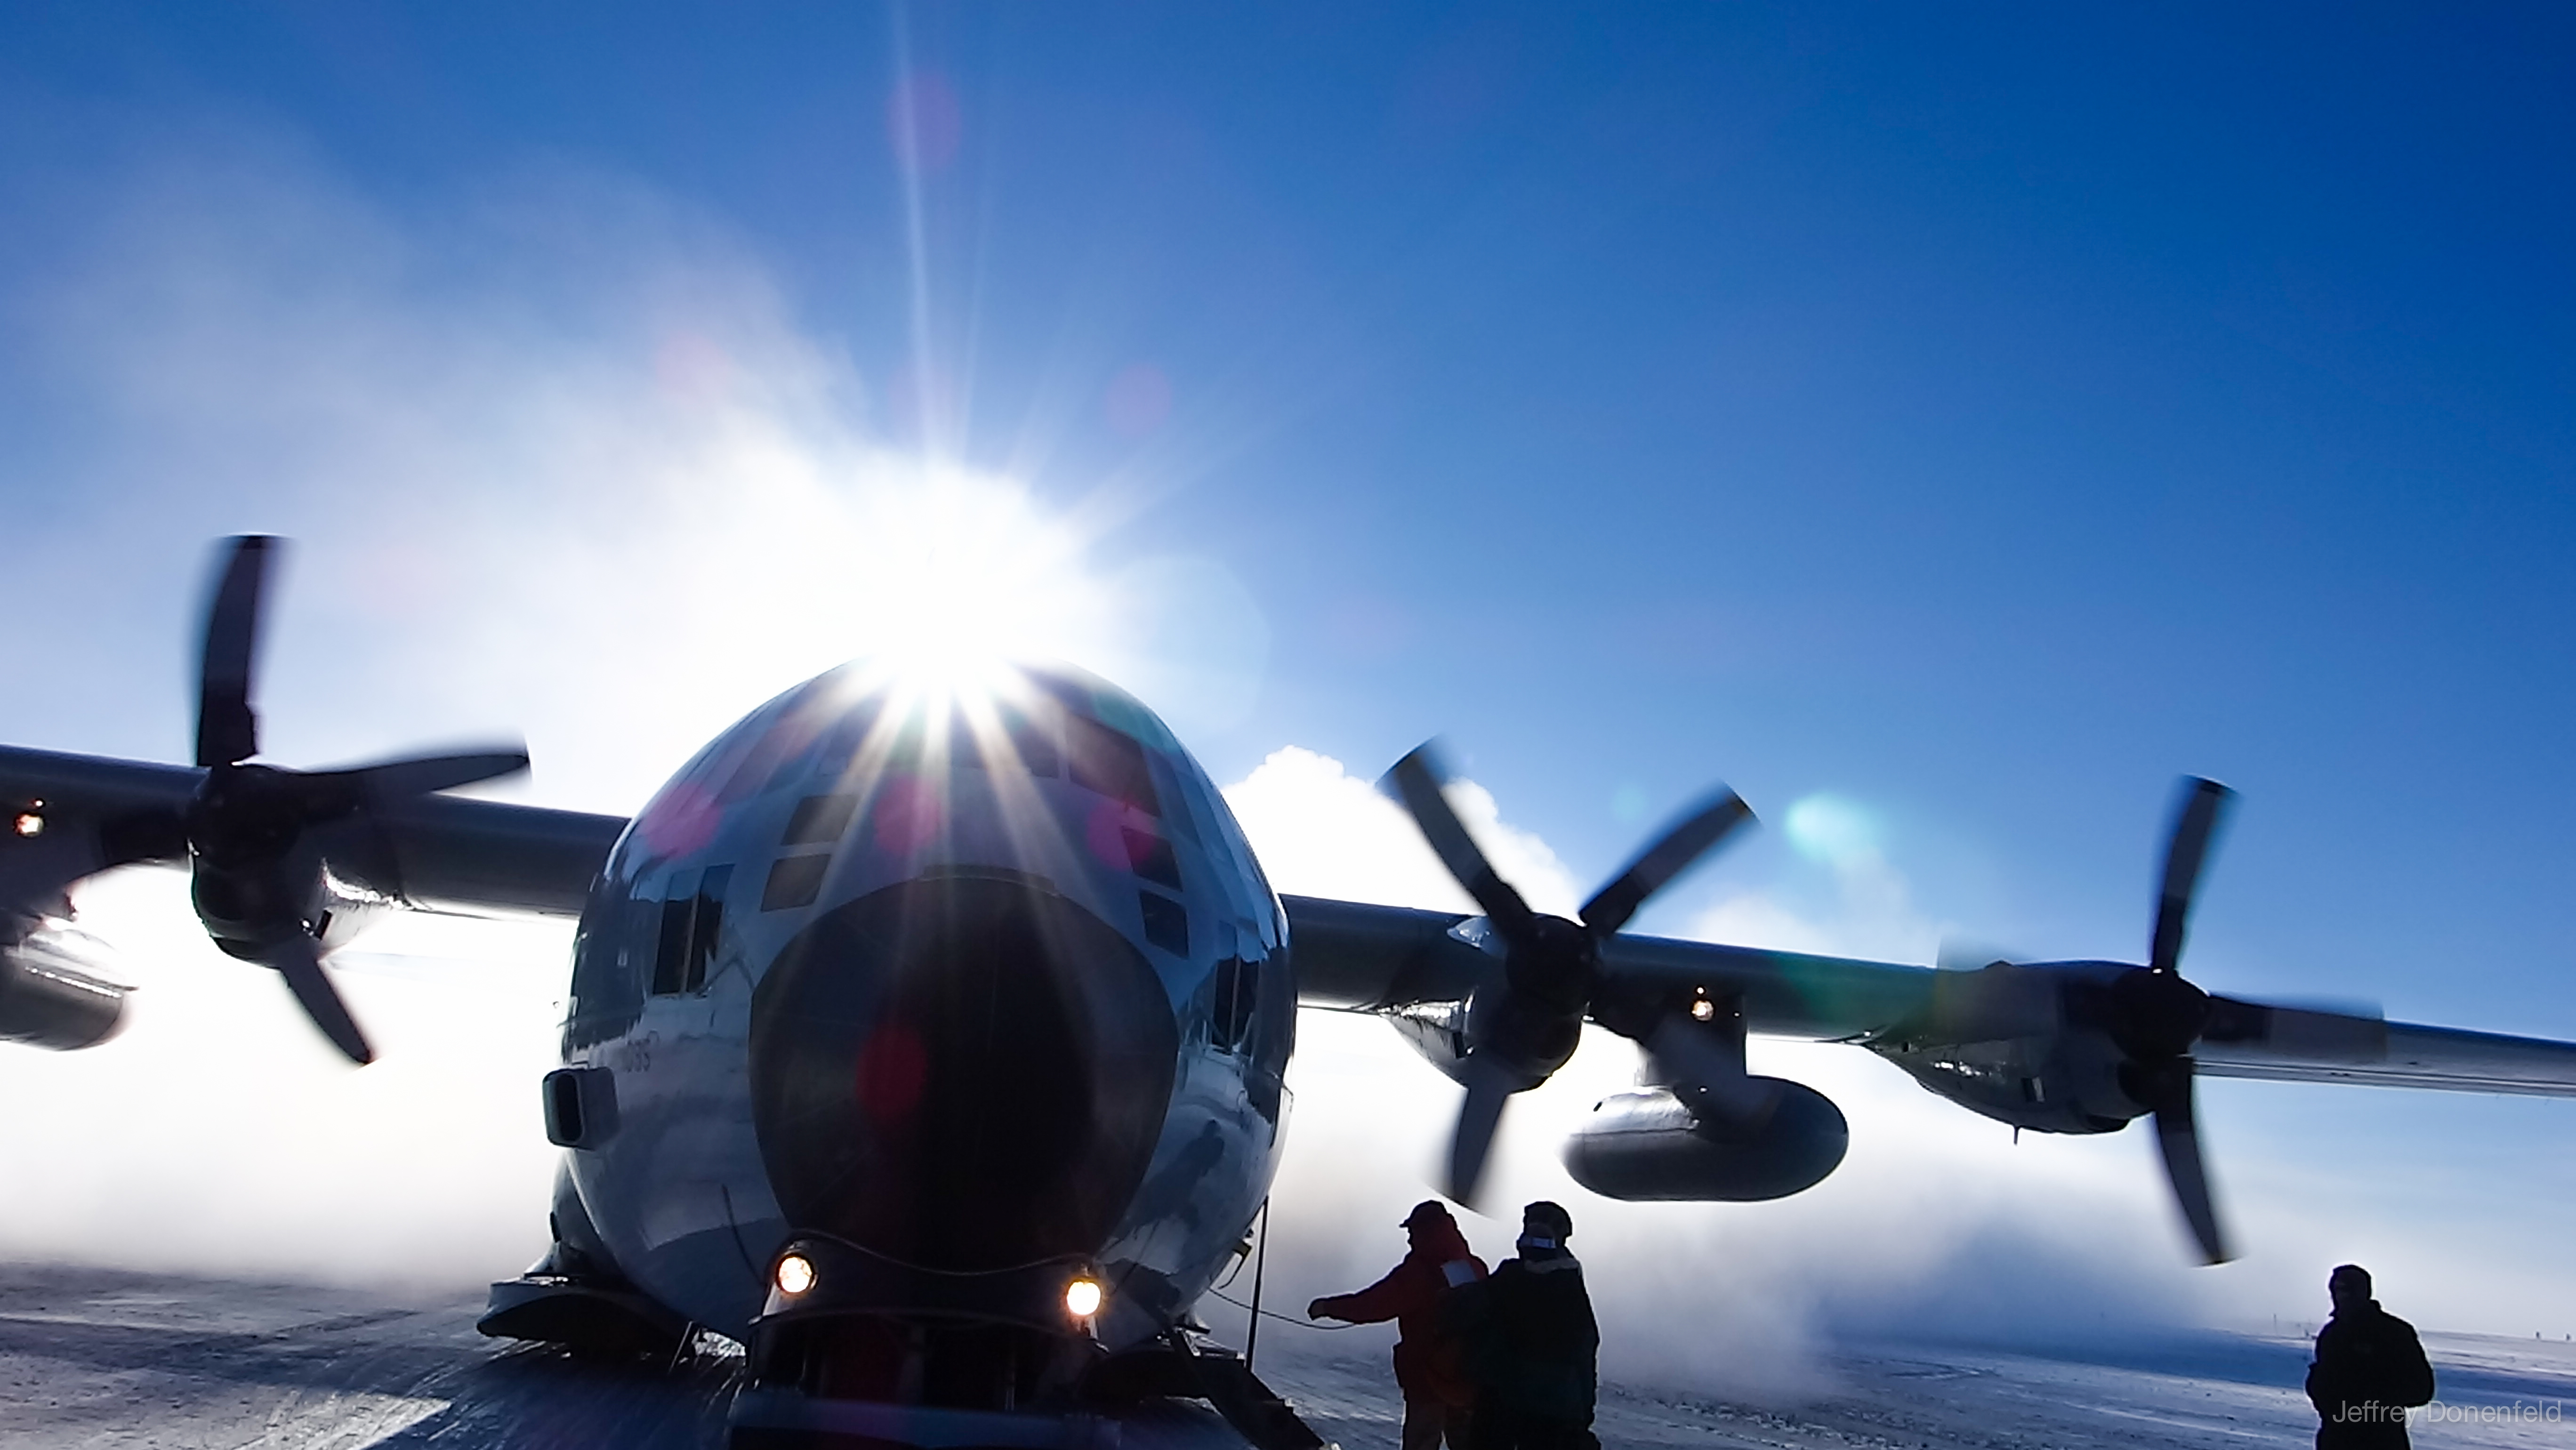 Leaving the South Pole Station for McMurdo Station